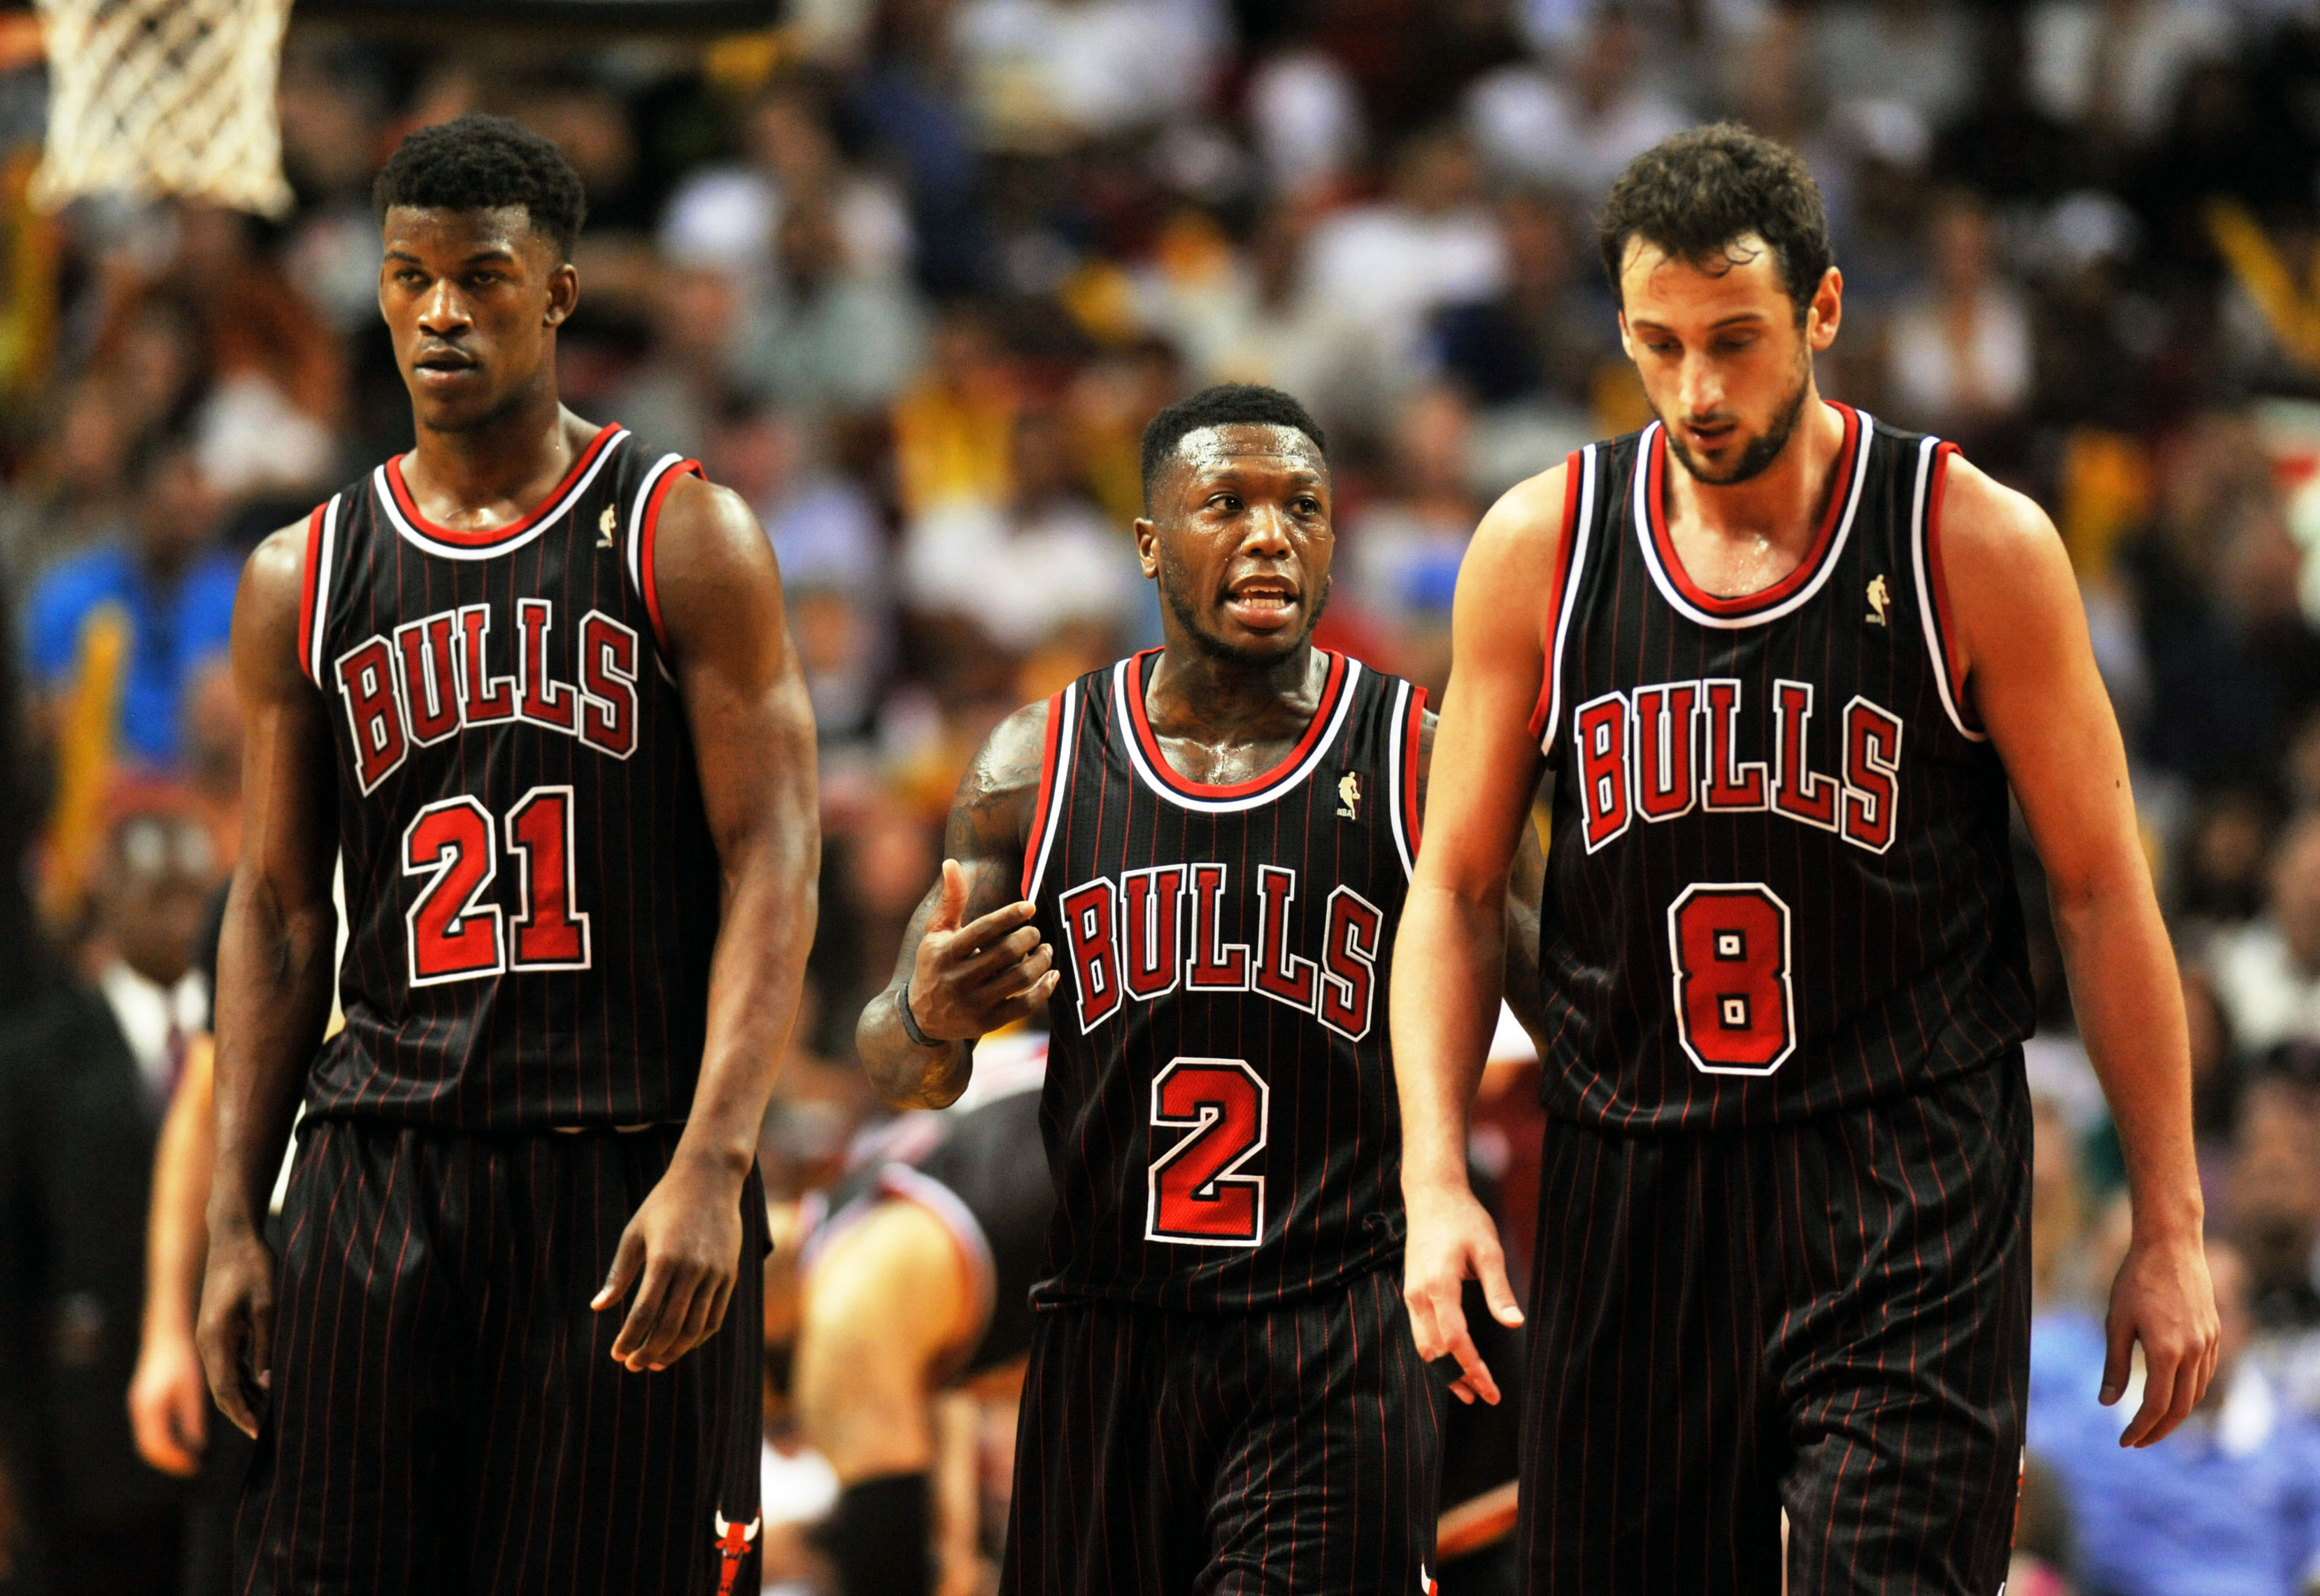 Jimmy Butler, Nate Robinson, and Marco Belinelli 